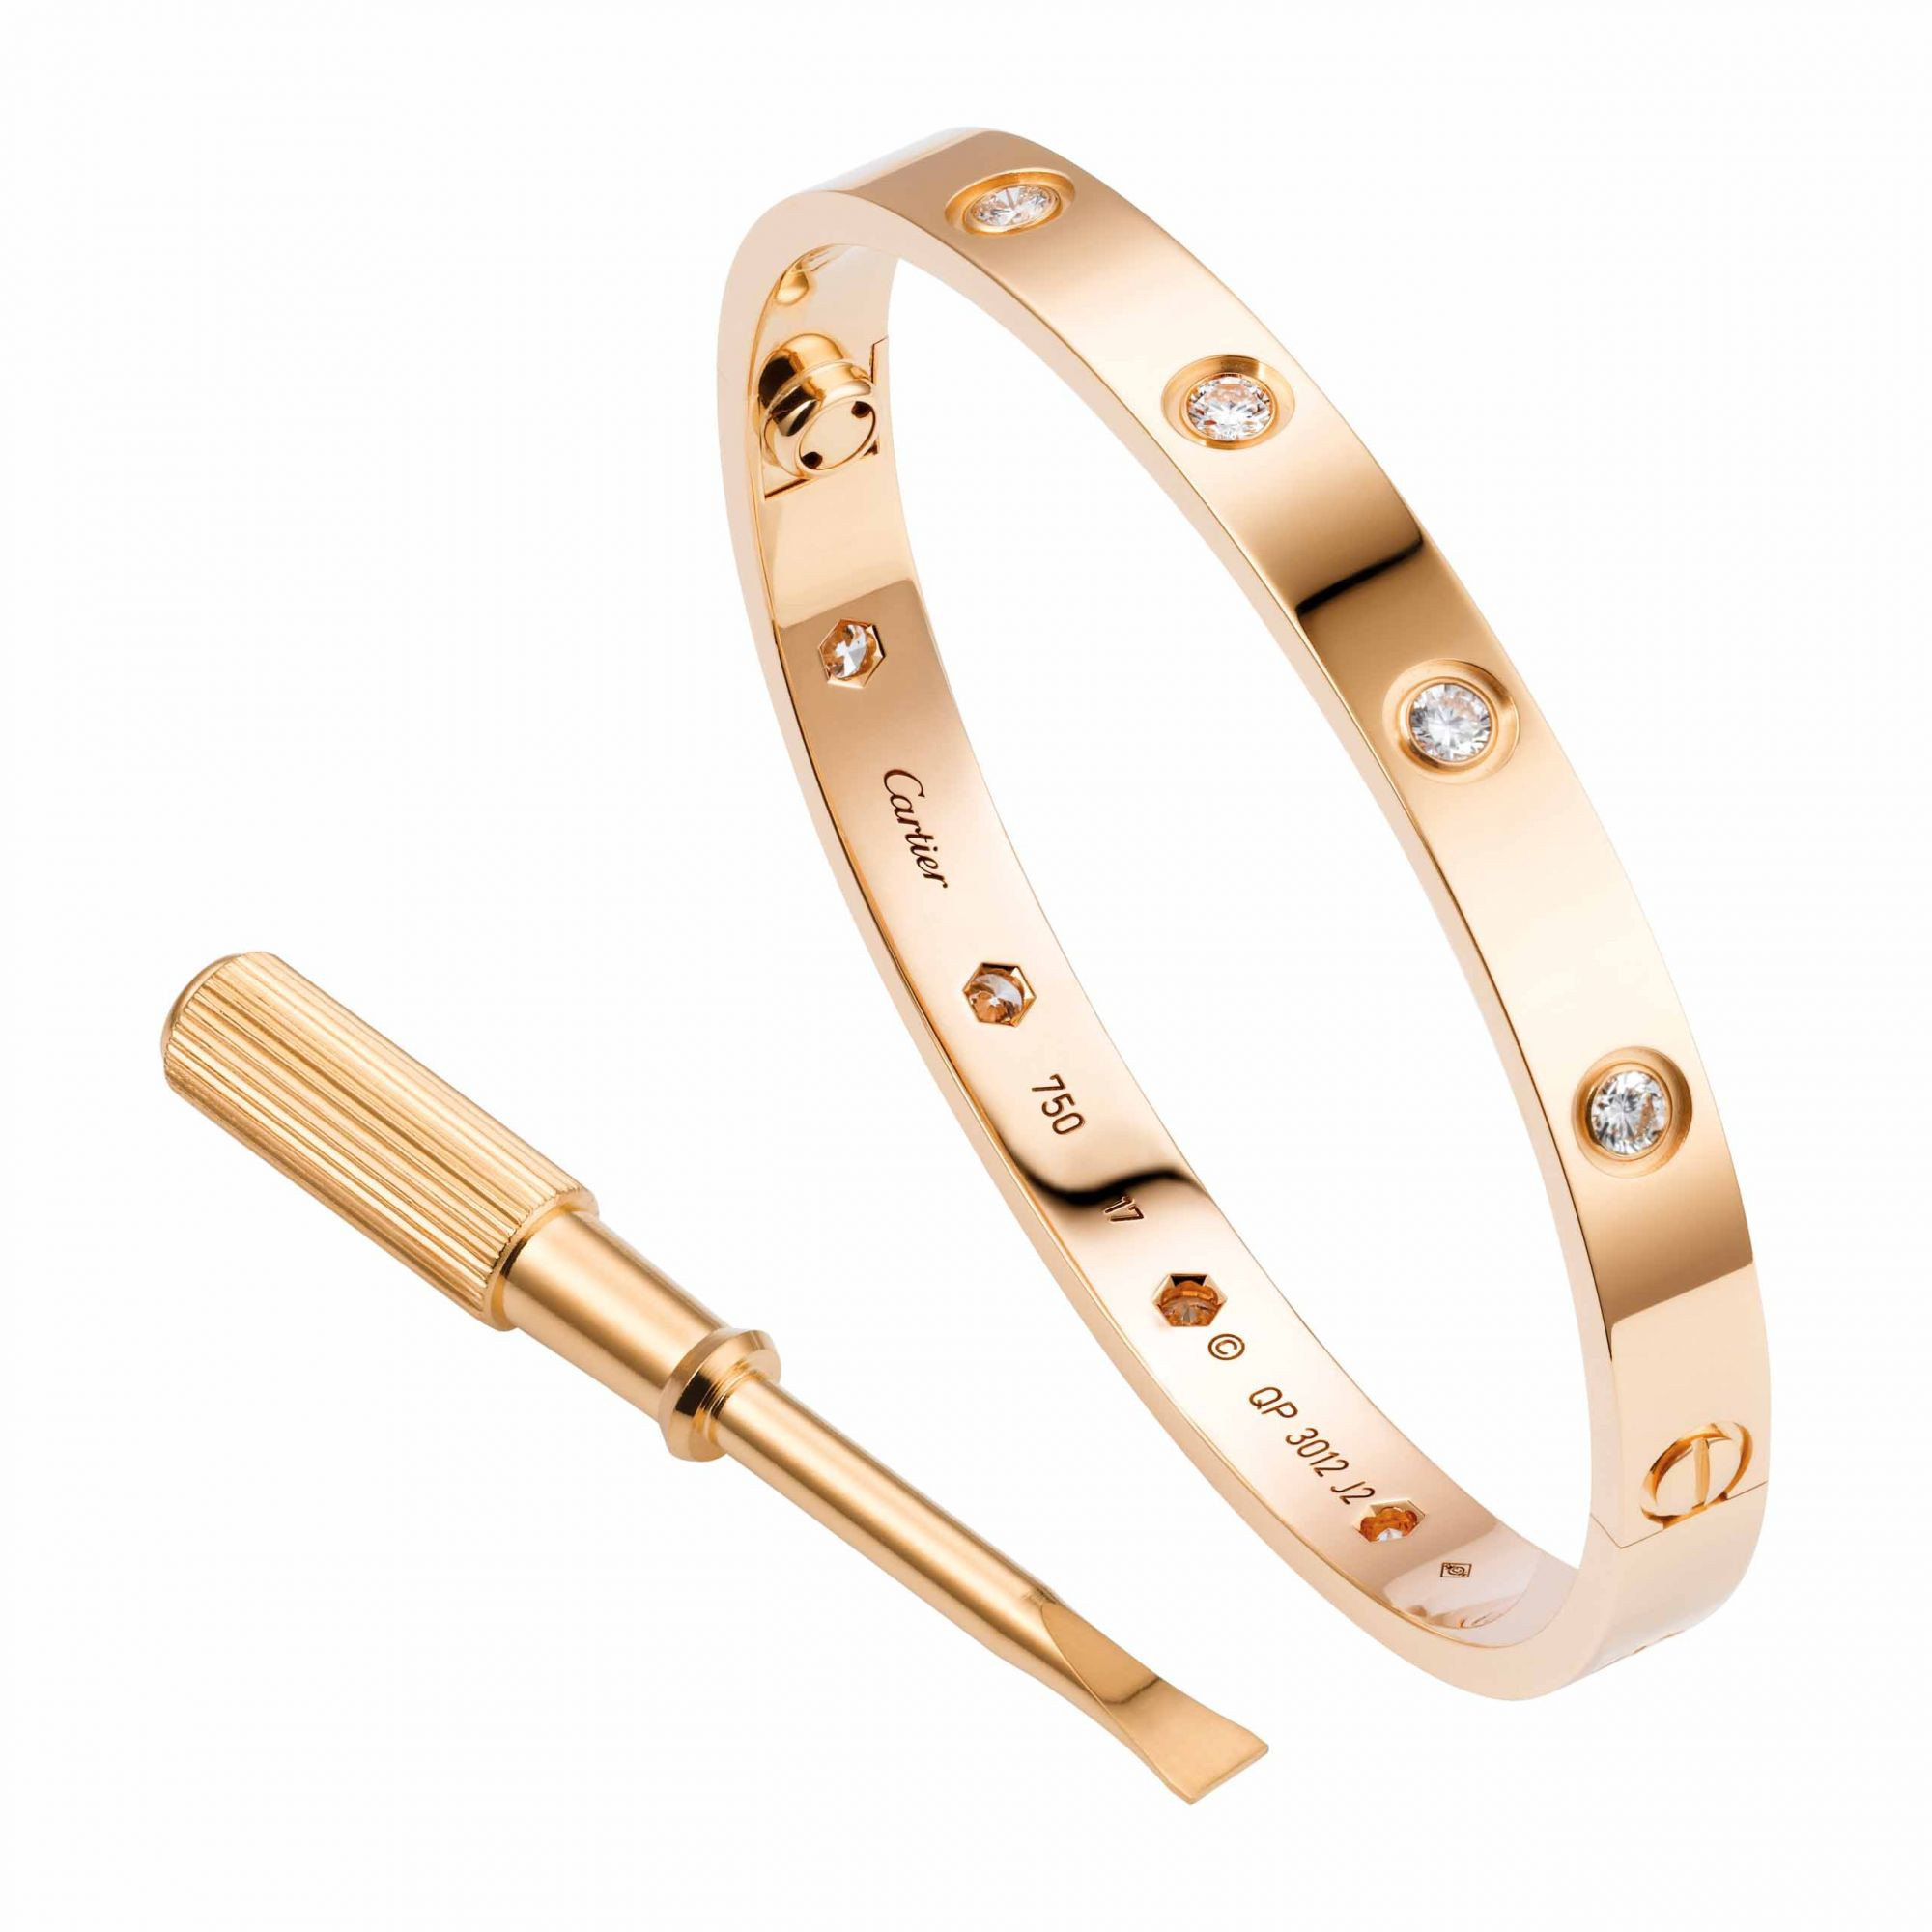 Cartier Bracelet Love
 10 Things You Didn t Know About the Cartier Love Bracelet